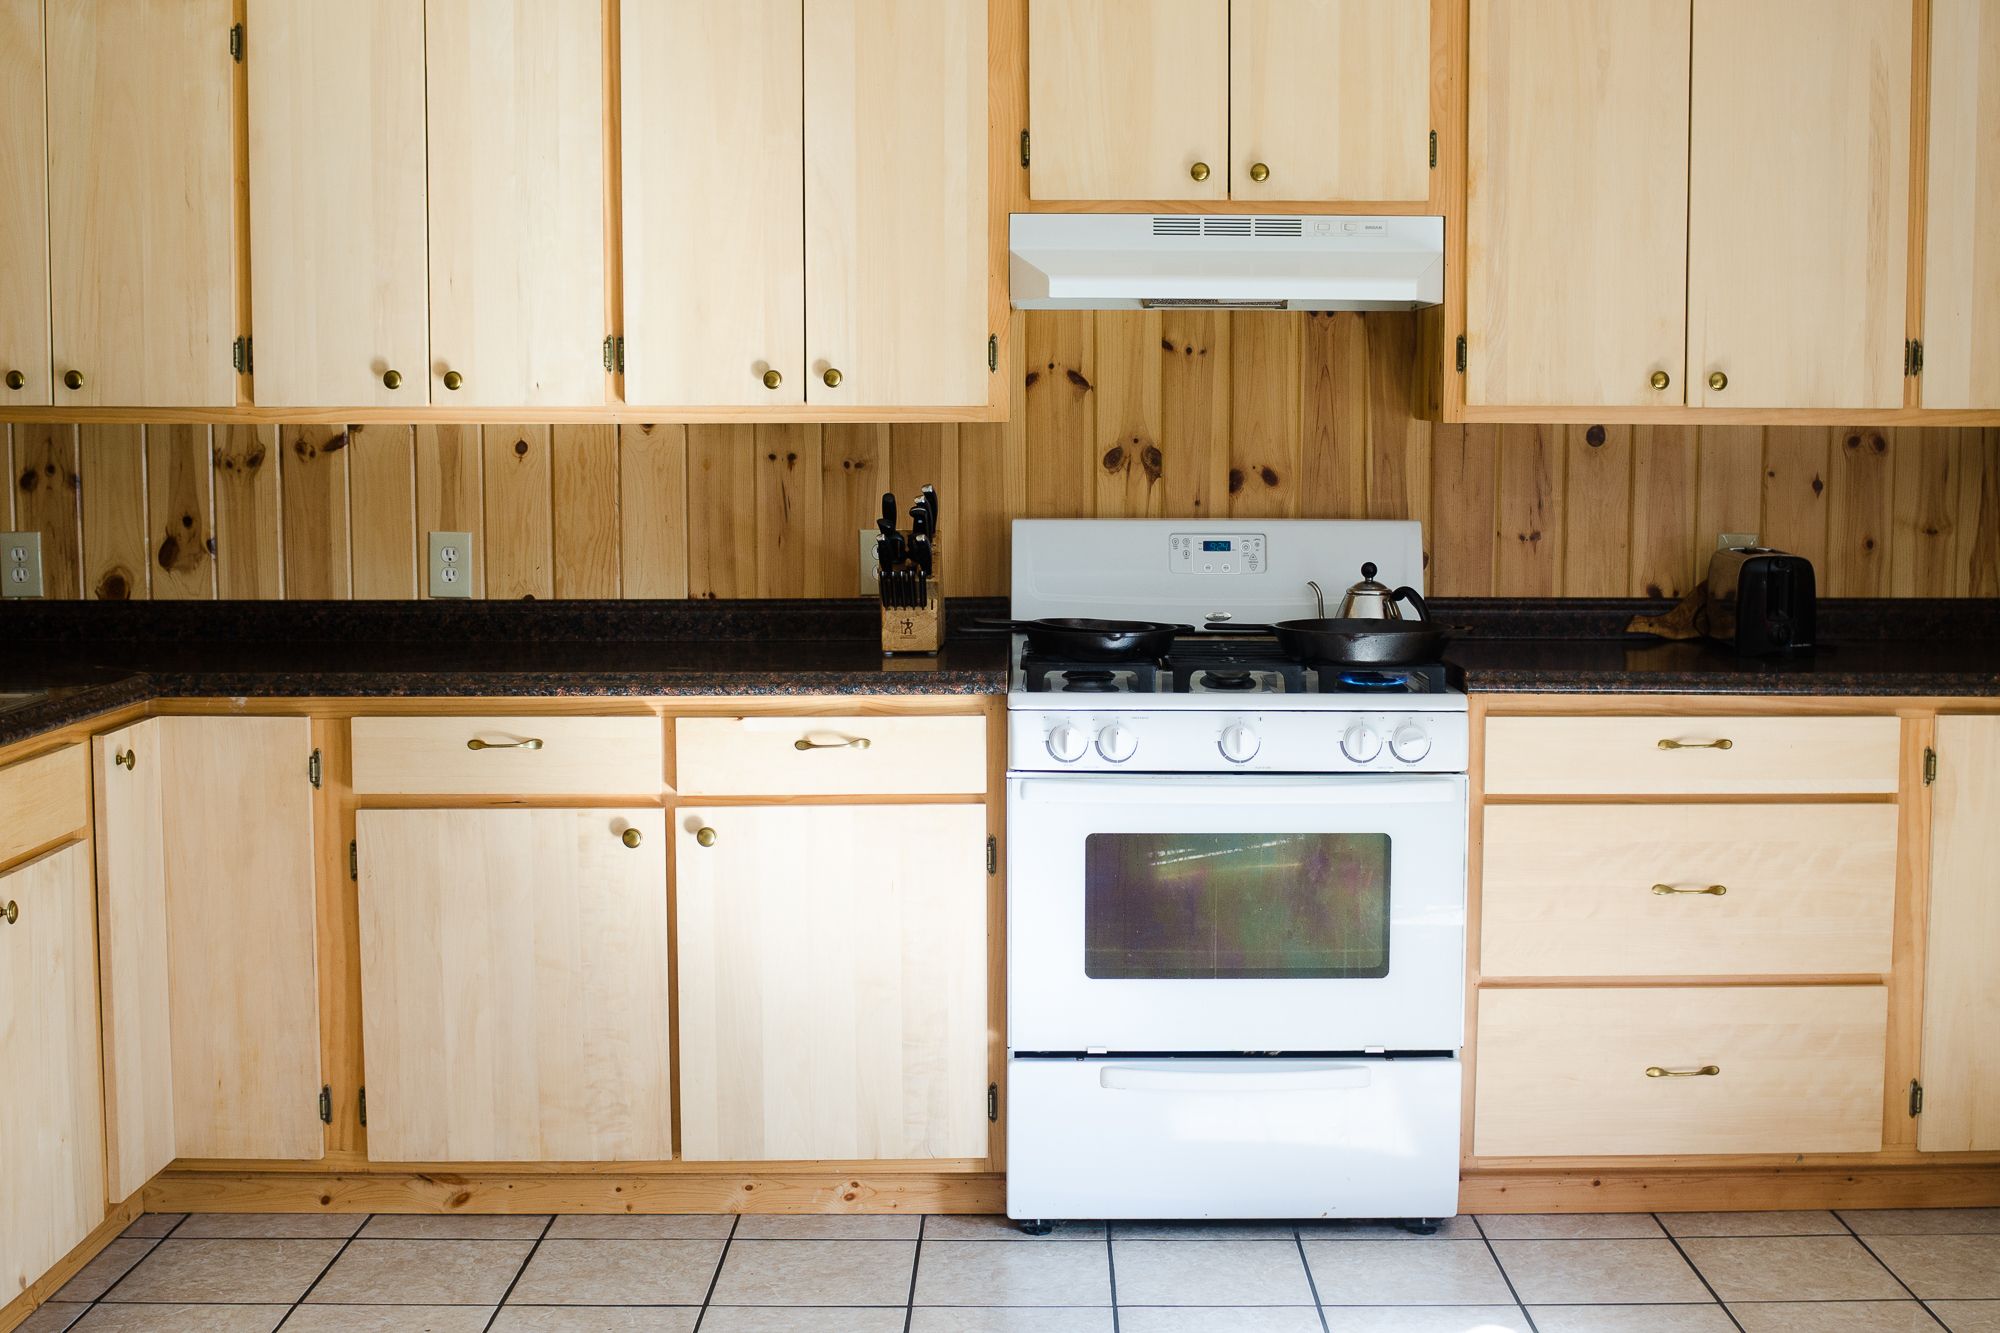 10 Simple Steps to Kitchen Safety